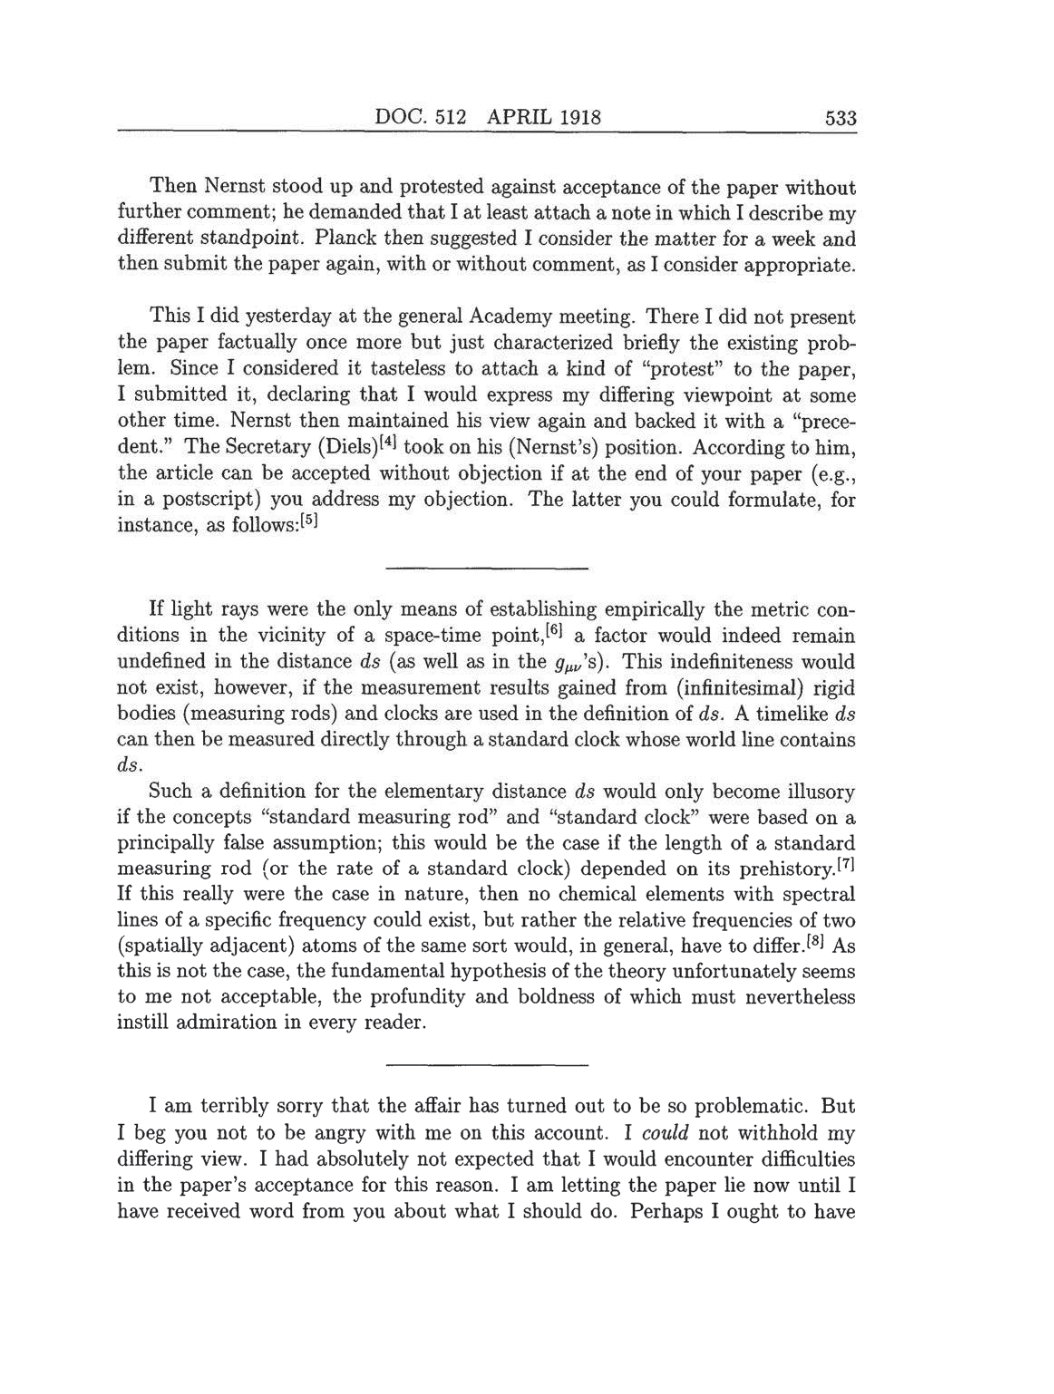 Volume 8: The Berlin Years: Correspondence, 1914-1918 (English translation supplement) page 533